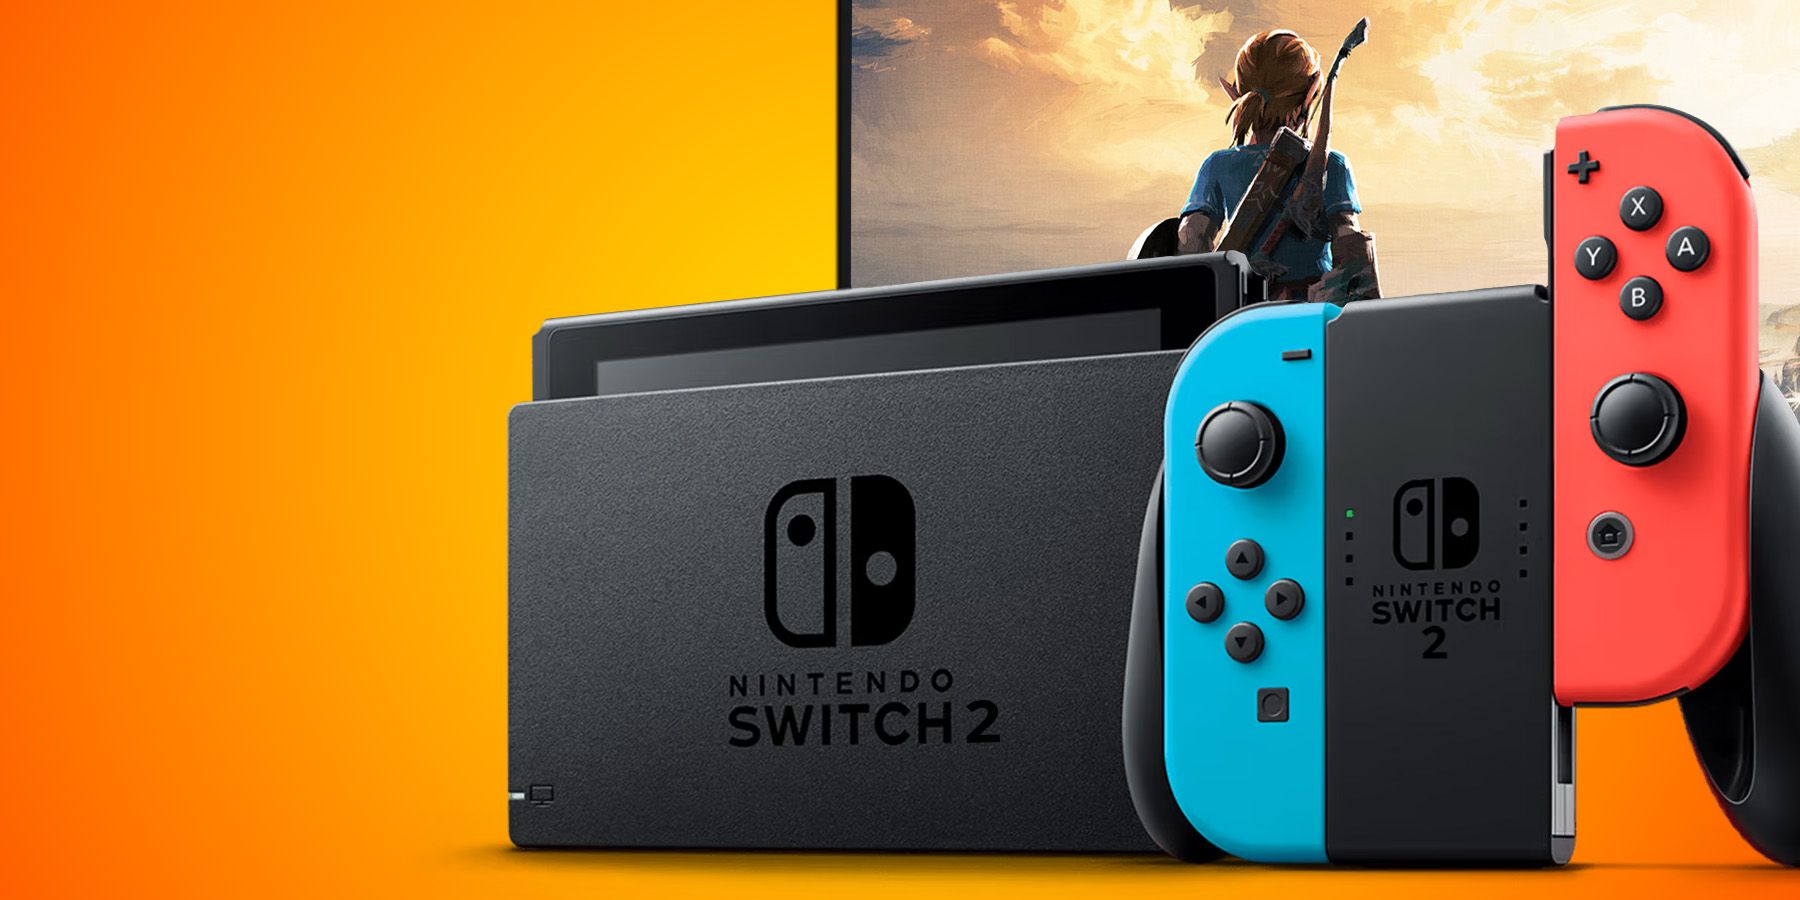 Zelda Breath of the Wild Wii U and Nintendo Switch has a new 4K rival PC  version, Gaming, Entertainment